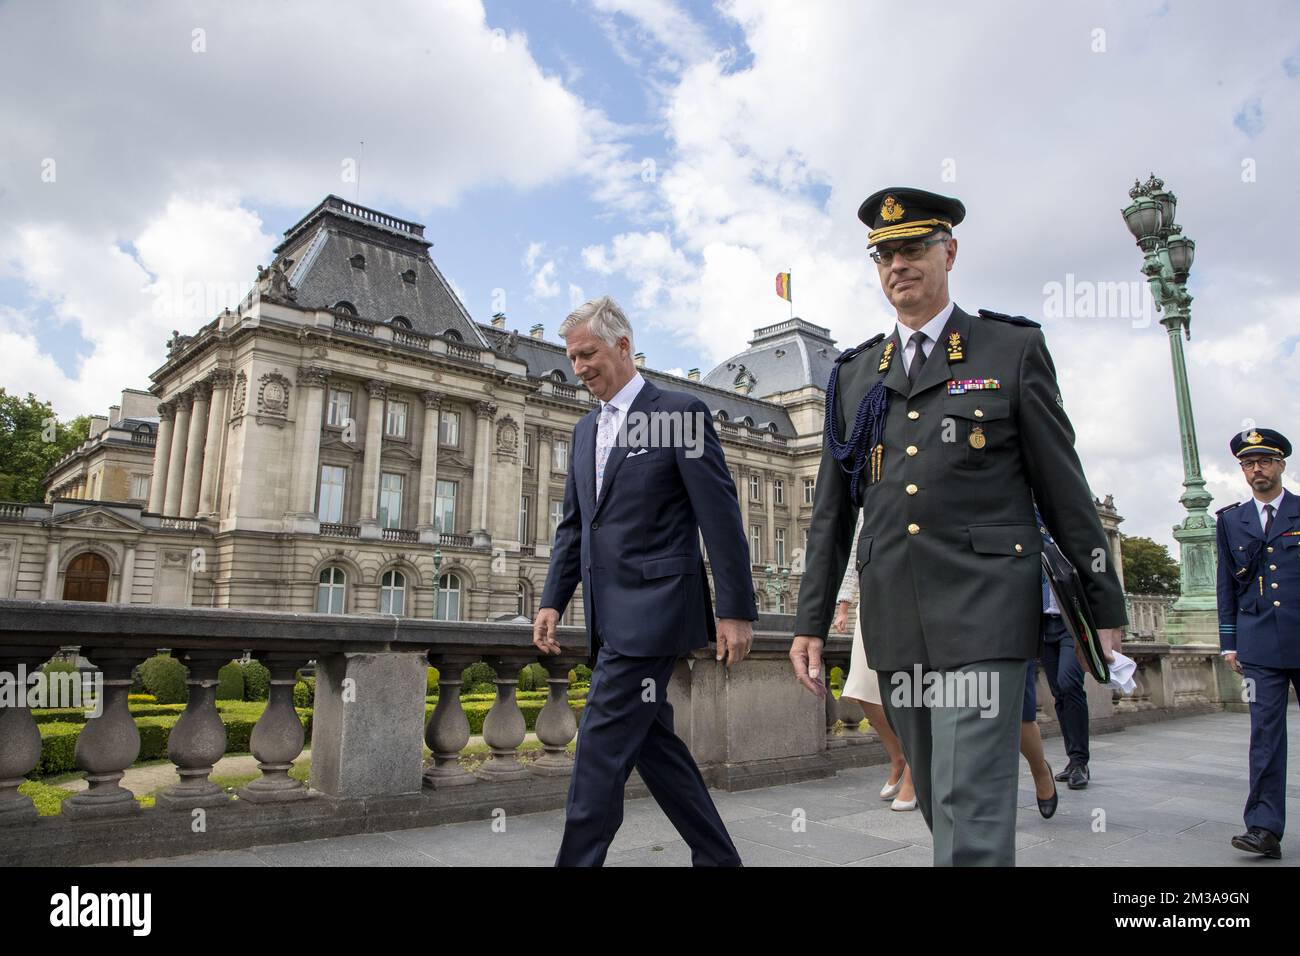 King Philippe - Filip of Belgium (L) arrives for a ceremony to award the 'Francqui Prize' scientific awards for 2021 and 2022, Wednesday 01 June 2022 in Brussels. The 2021 prize is awarded to ULiege astrologist Michael Gillon, ULiege's Veerle Rots will receive the 2022 one for her Palaeolithic Stone Tool Hafting research. The scientific prize, which is often referred to as the 'Belgian Nobel Prize', is awarded by The Francqui Foundation and is worth 250.000 euros. BELGA PHOTO NICOLAS MAETERLINCK Stock Photo